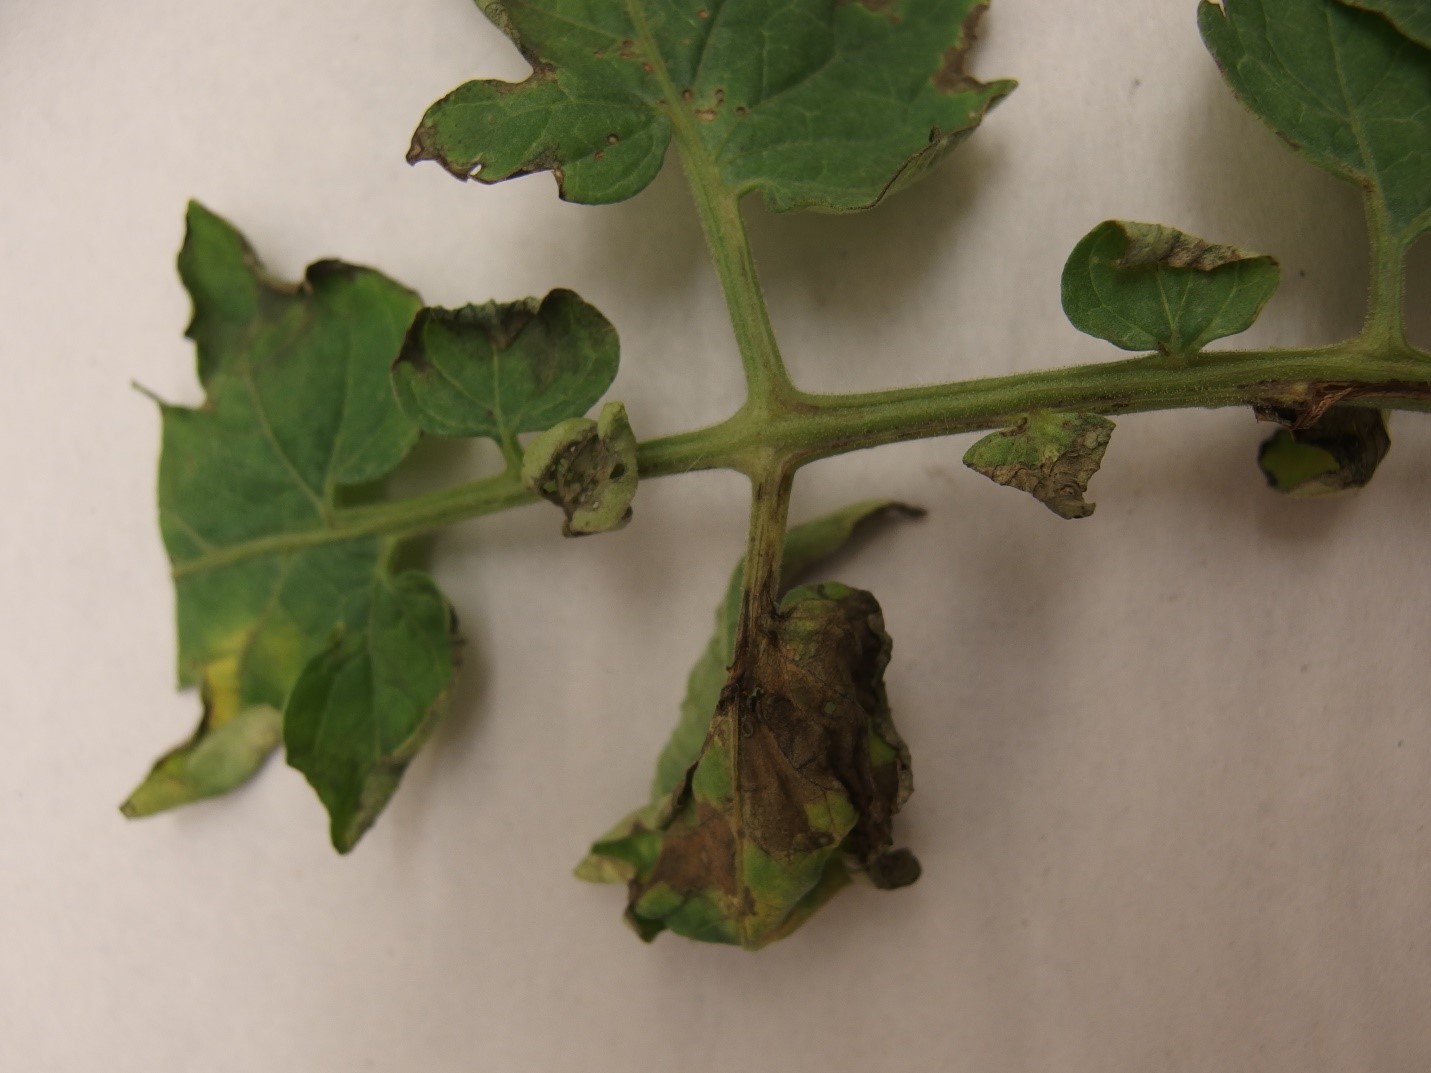 bacterial canker disease on tomato